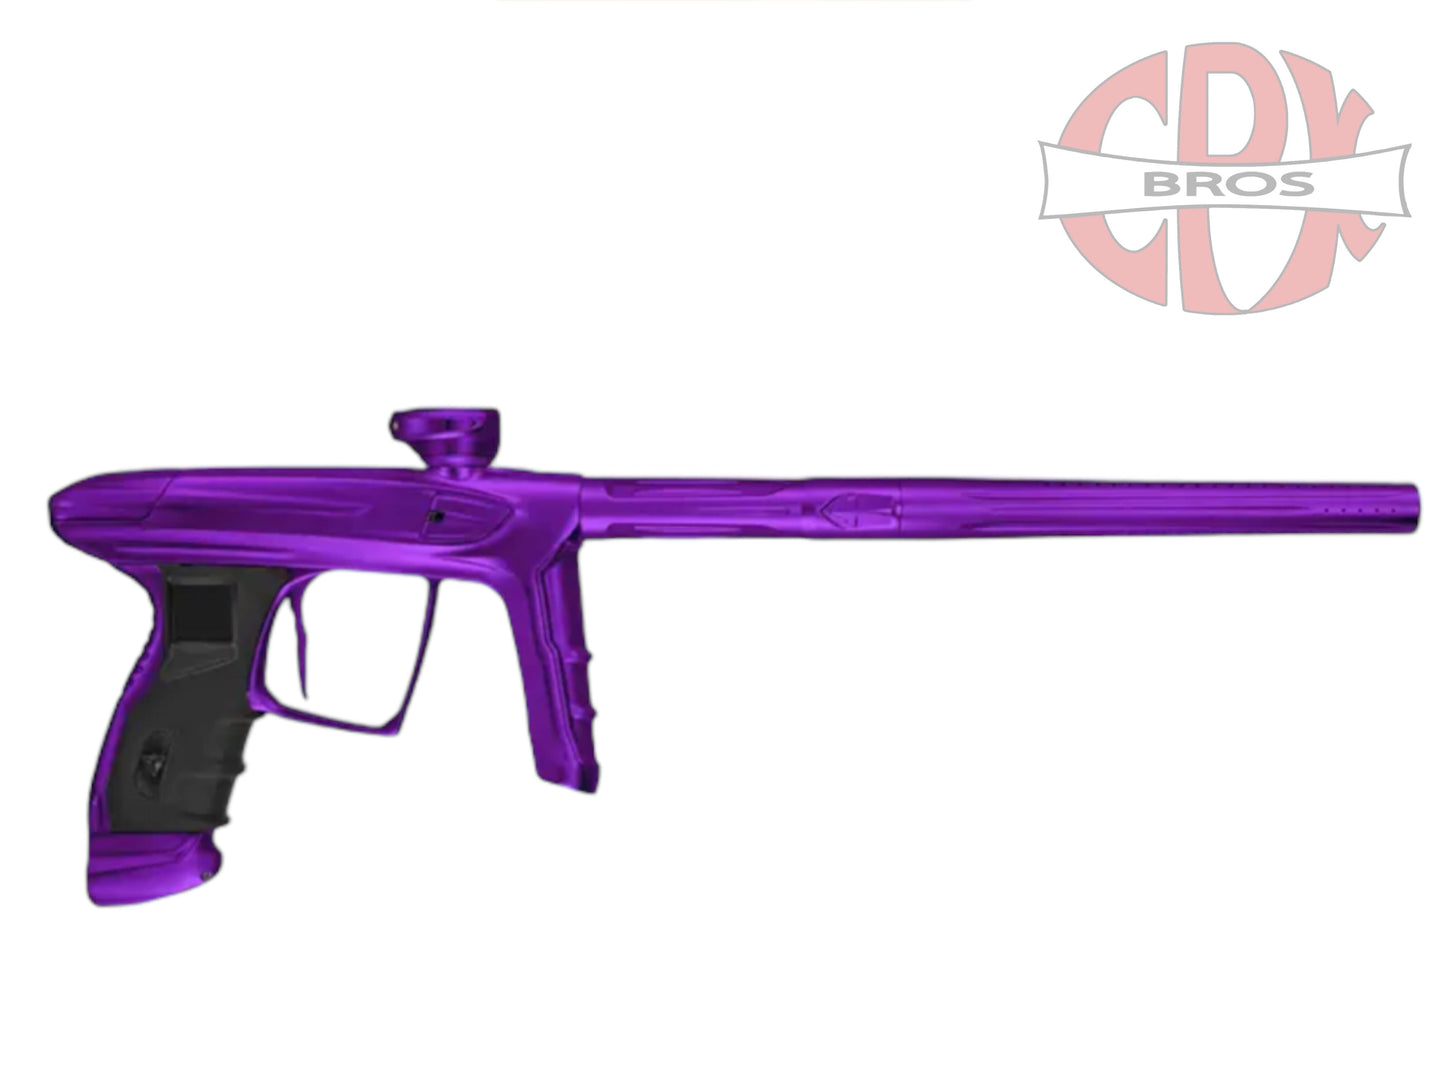 Used (Pre-Order) DLX Luxe IDOL Dust Purple / Dust Purple Paintball Gun from CPXBrosPaintball Buy/Sell/Trade Paintball Markers, New Paintball Guns, Paintball Hoppers, Paintball Masks, and Hormesis Headbands